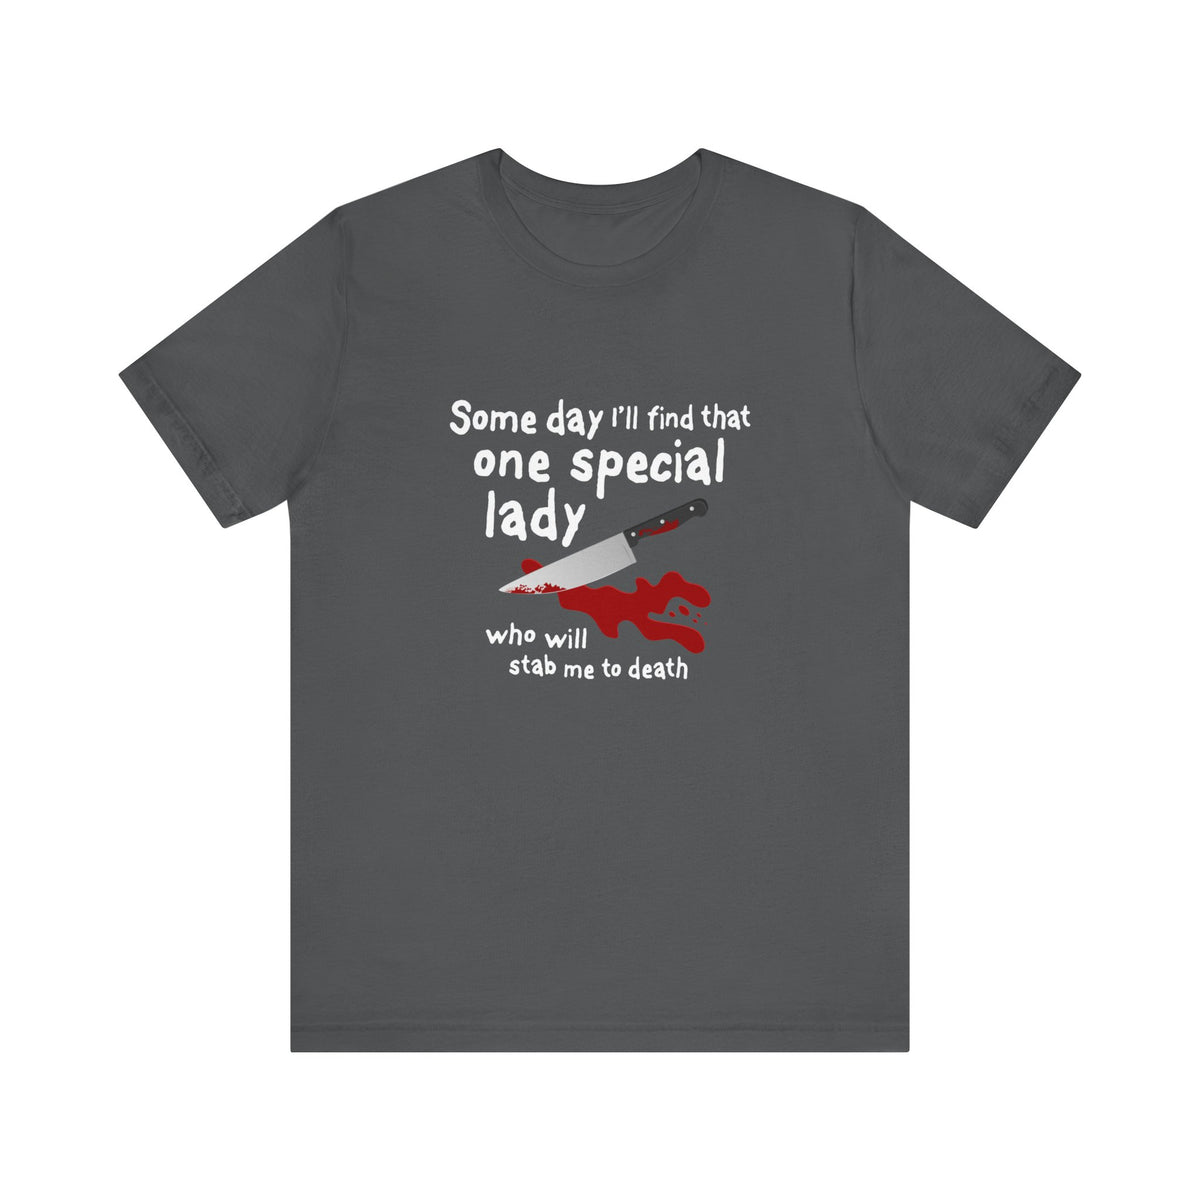 Some Day I'll Find That One Special Lady Who Will Stamb Me To Death - Men's T-Shirt